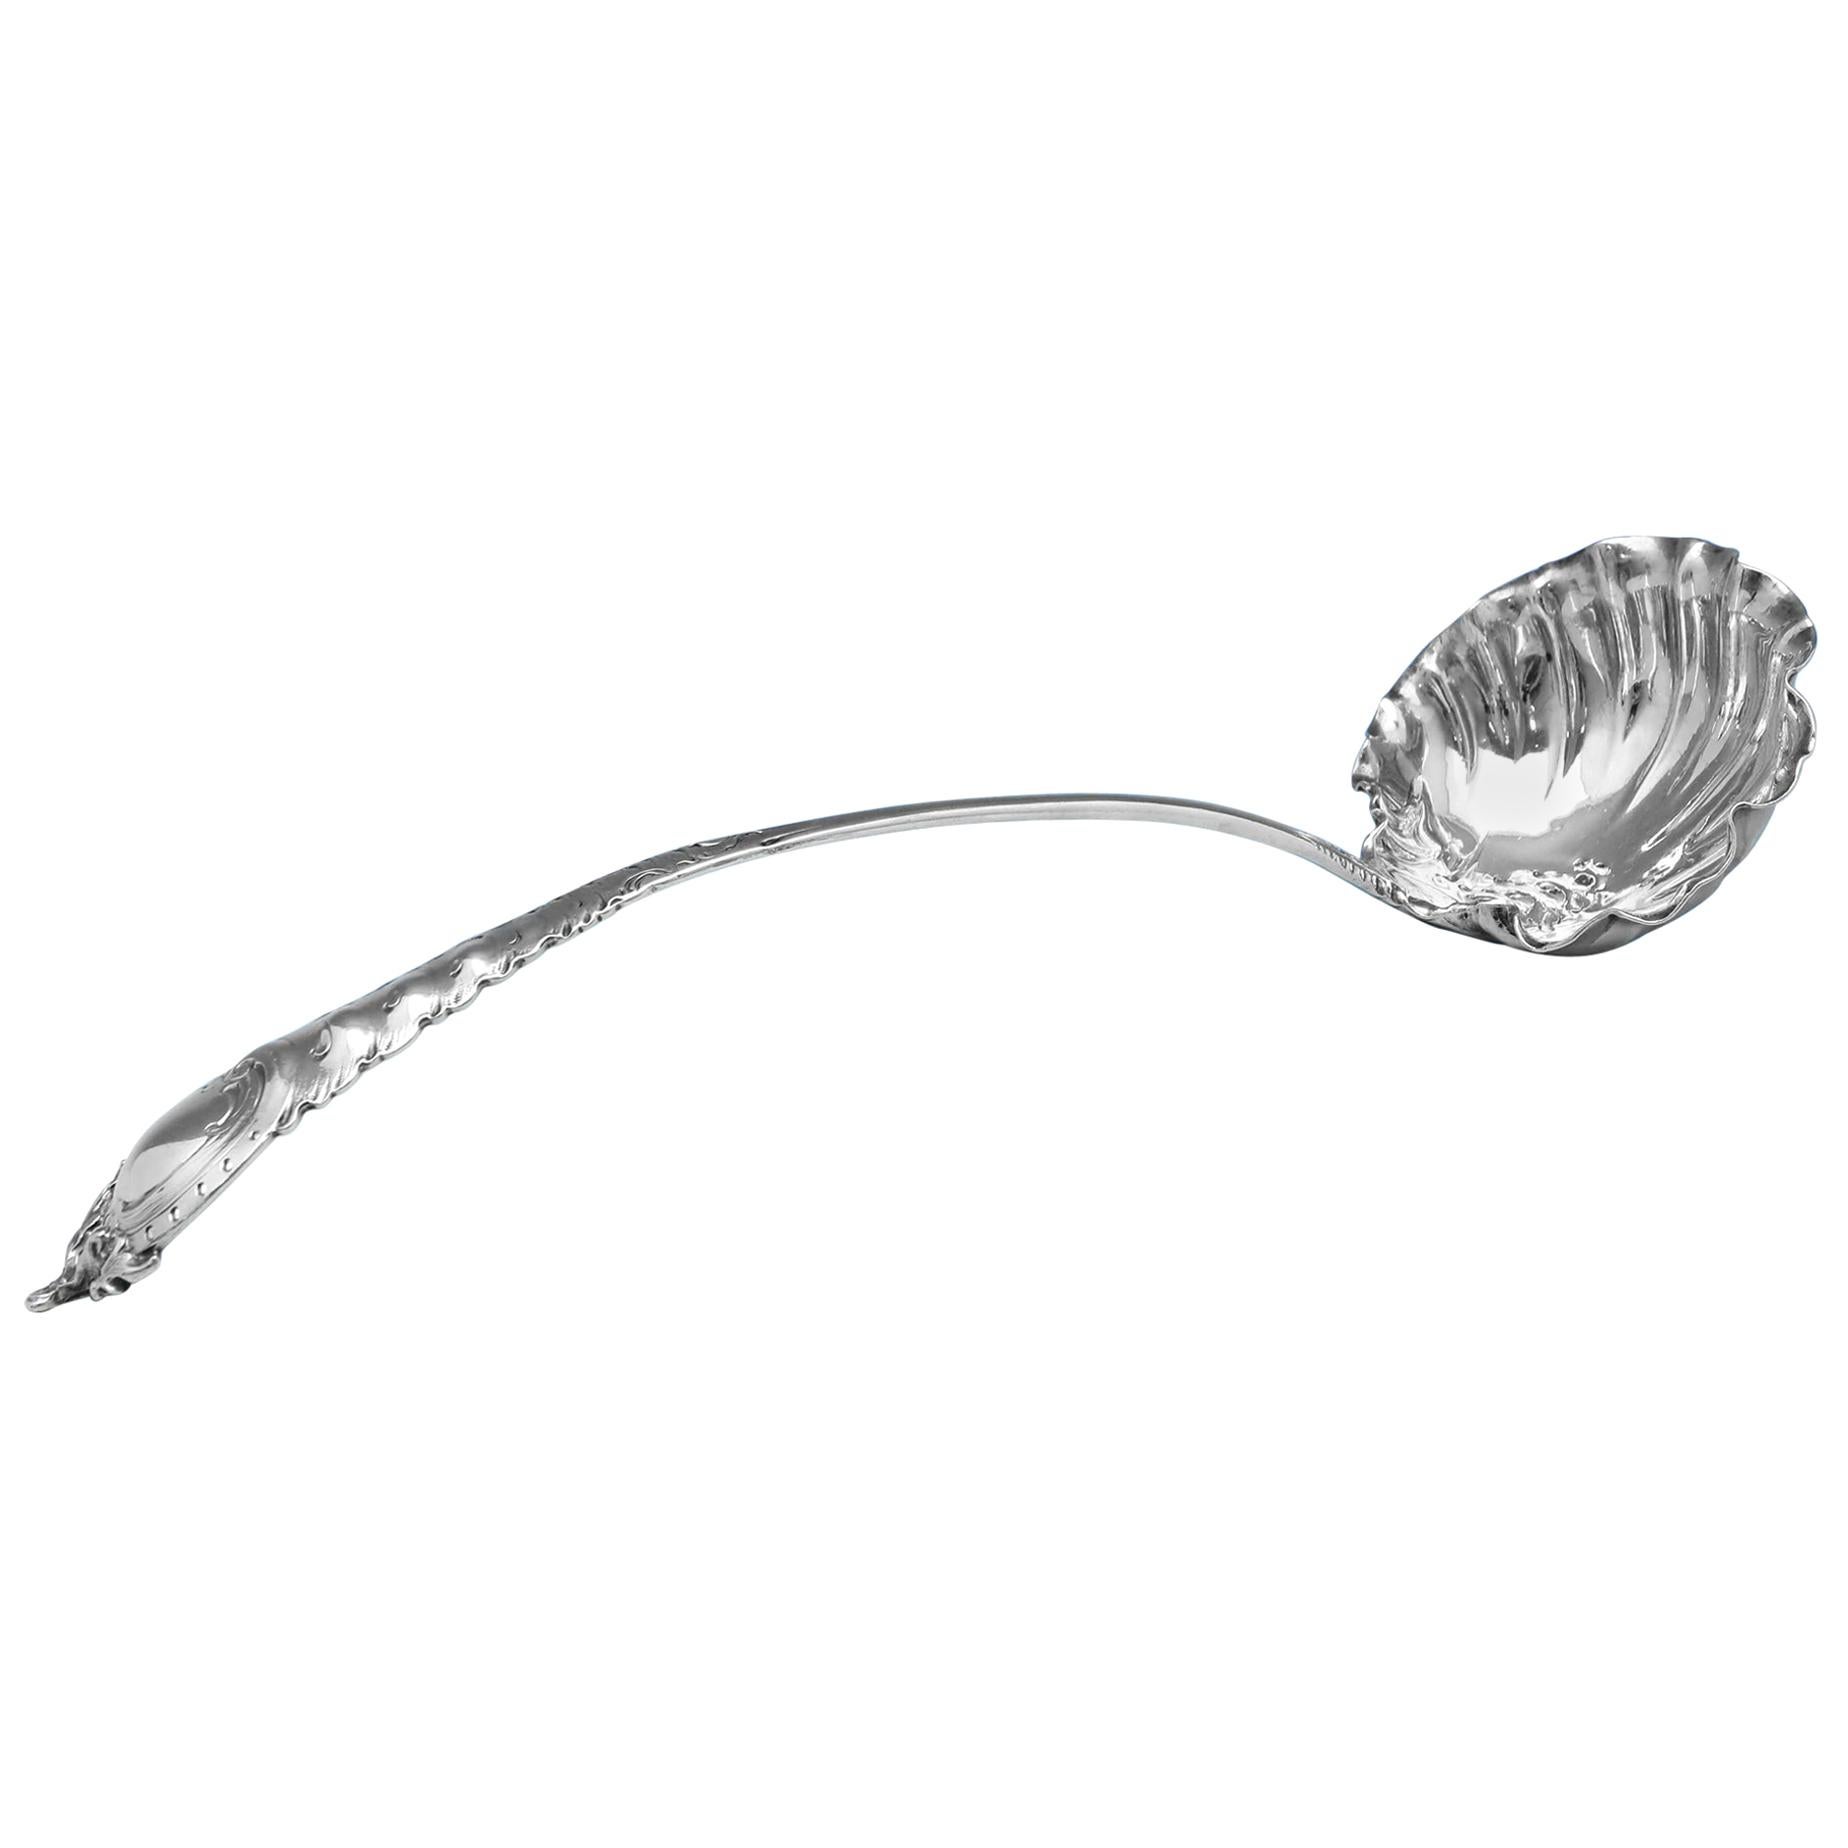 George II Rococo Antique Sterling Silver Punch Ladle by Ebeneezer Coker, 1756